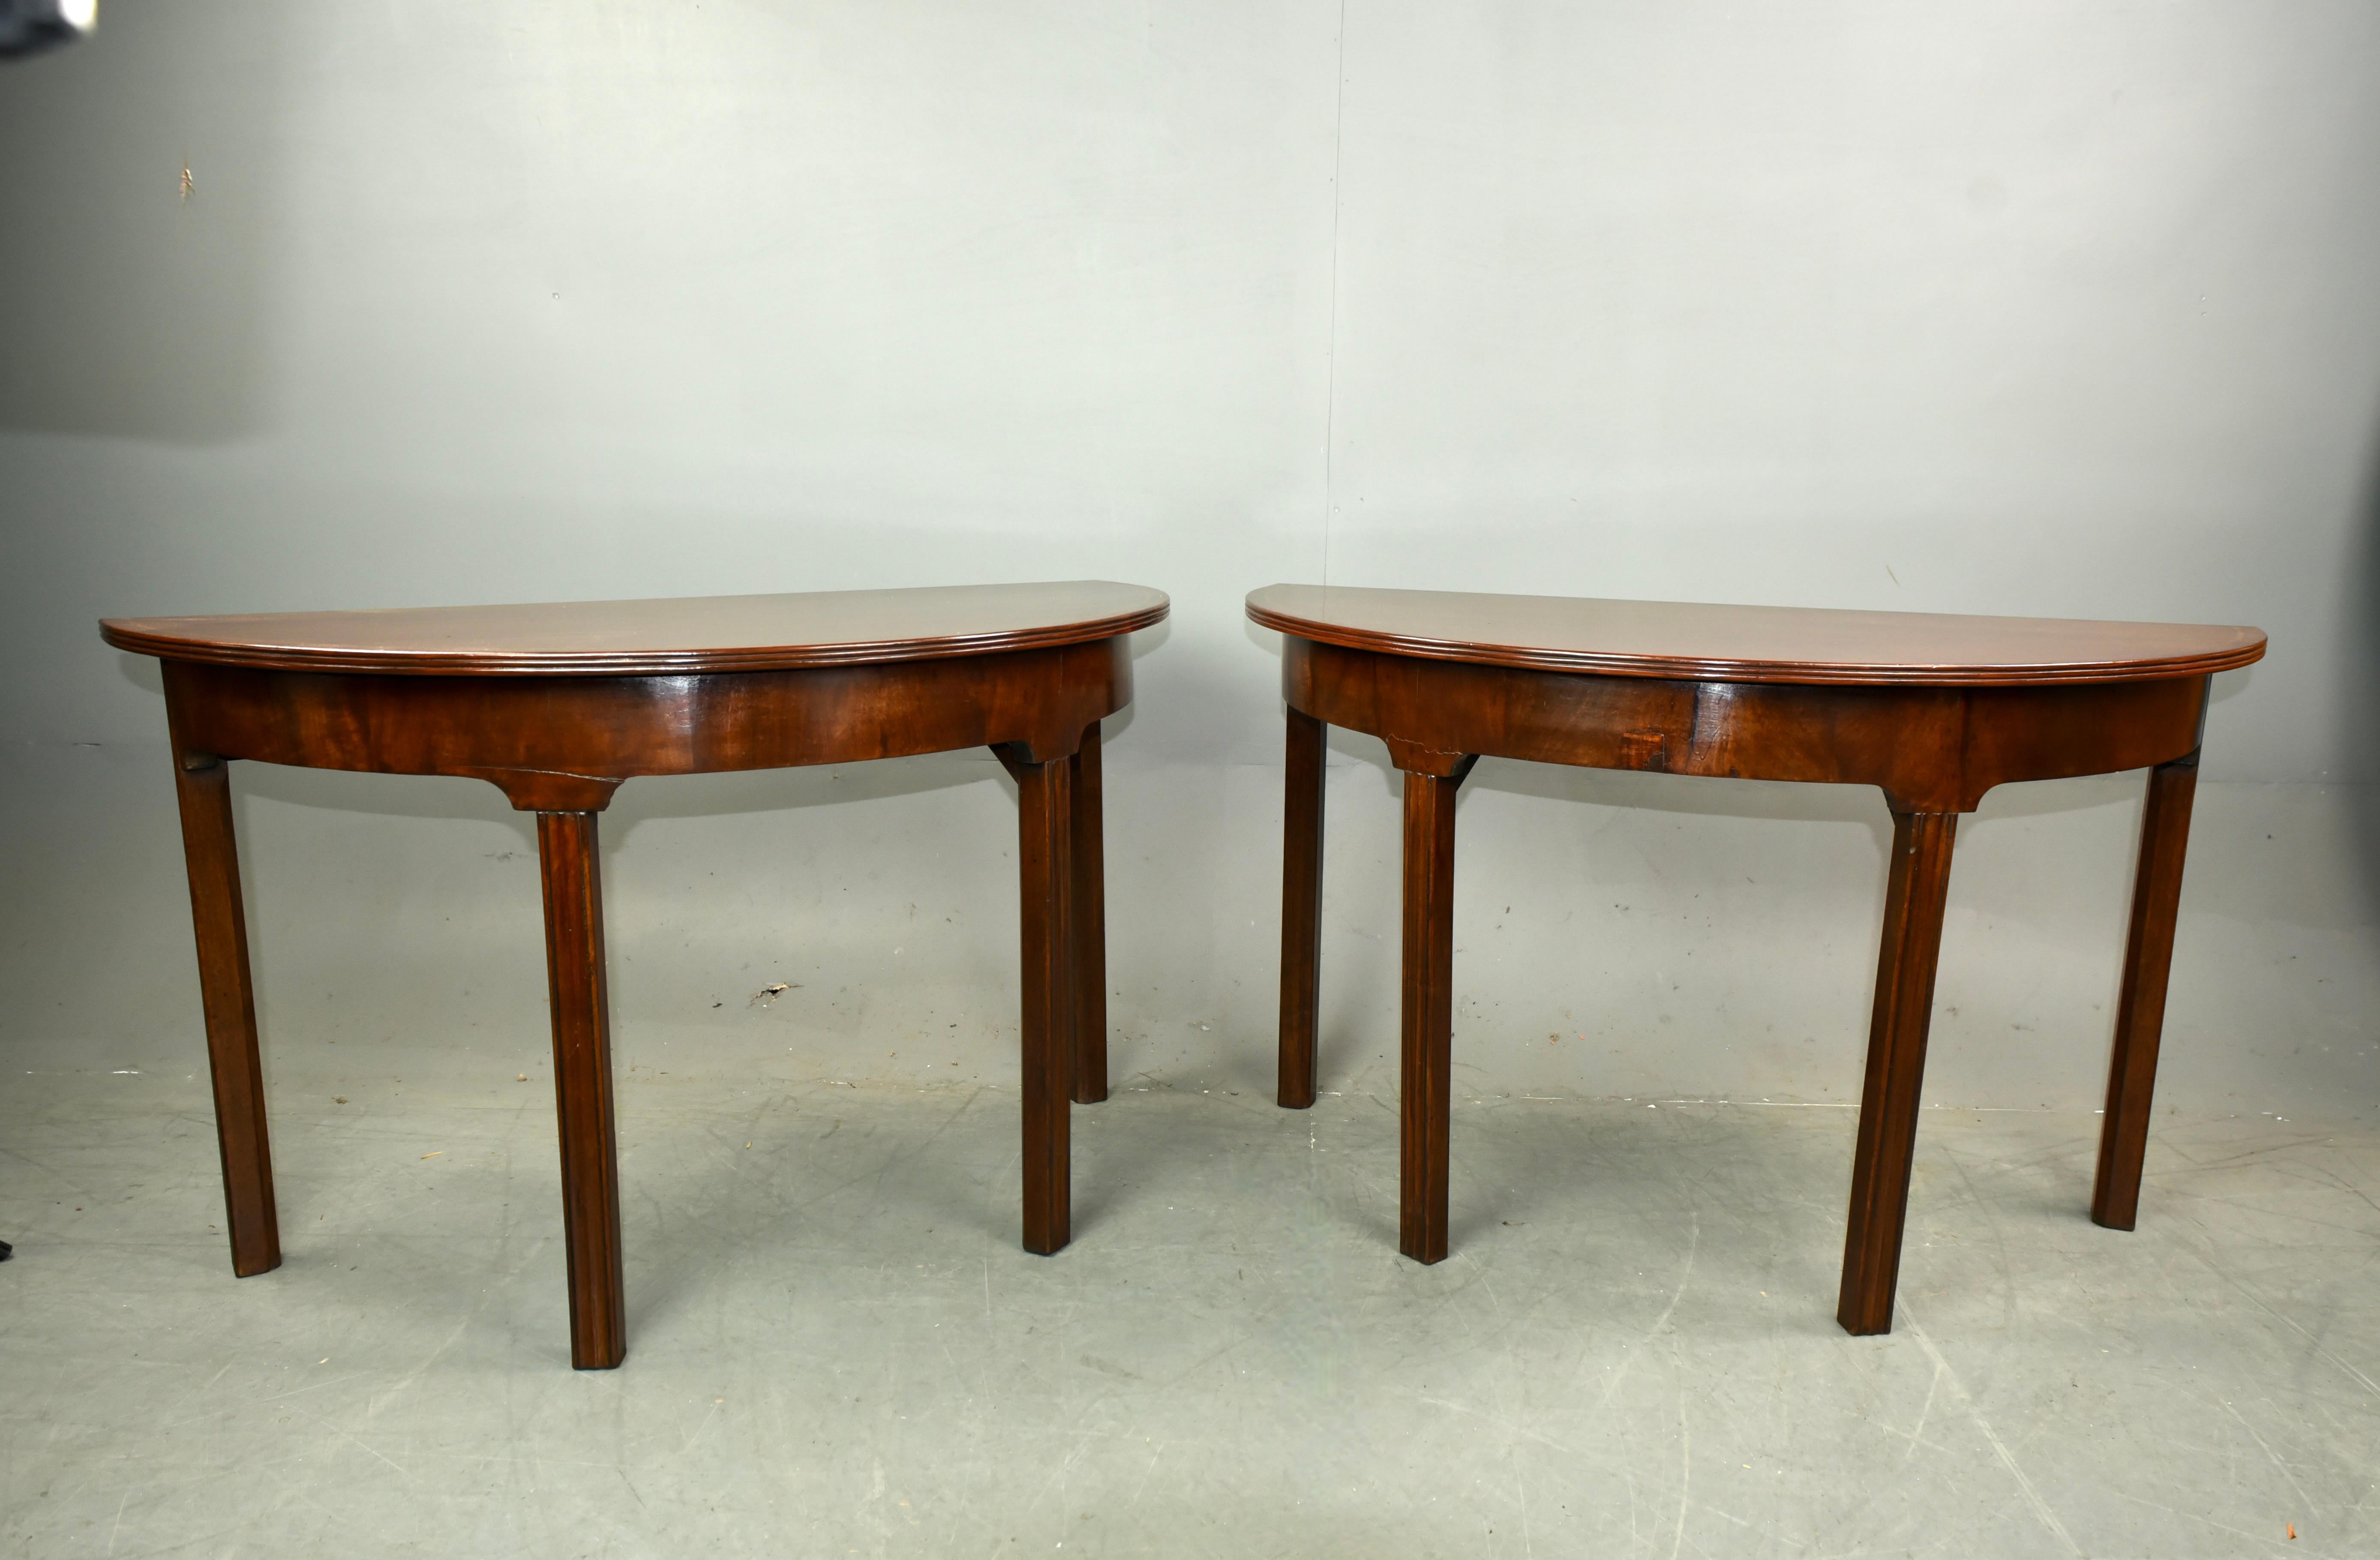 Fine pair of Georgian mahogany Demi lune console tables circa 1760

The tables have great proportions with fine figured solid mahogany tops with an inlay banding .
They stand on reeded tapered legs and are very sturdy .
The tables are a great rich